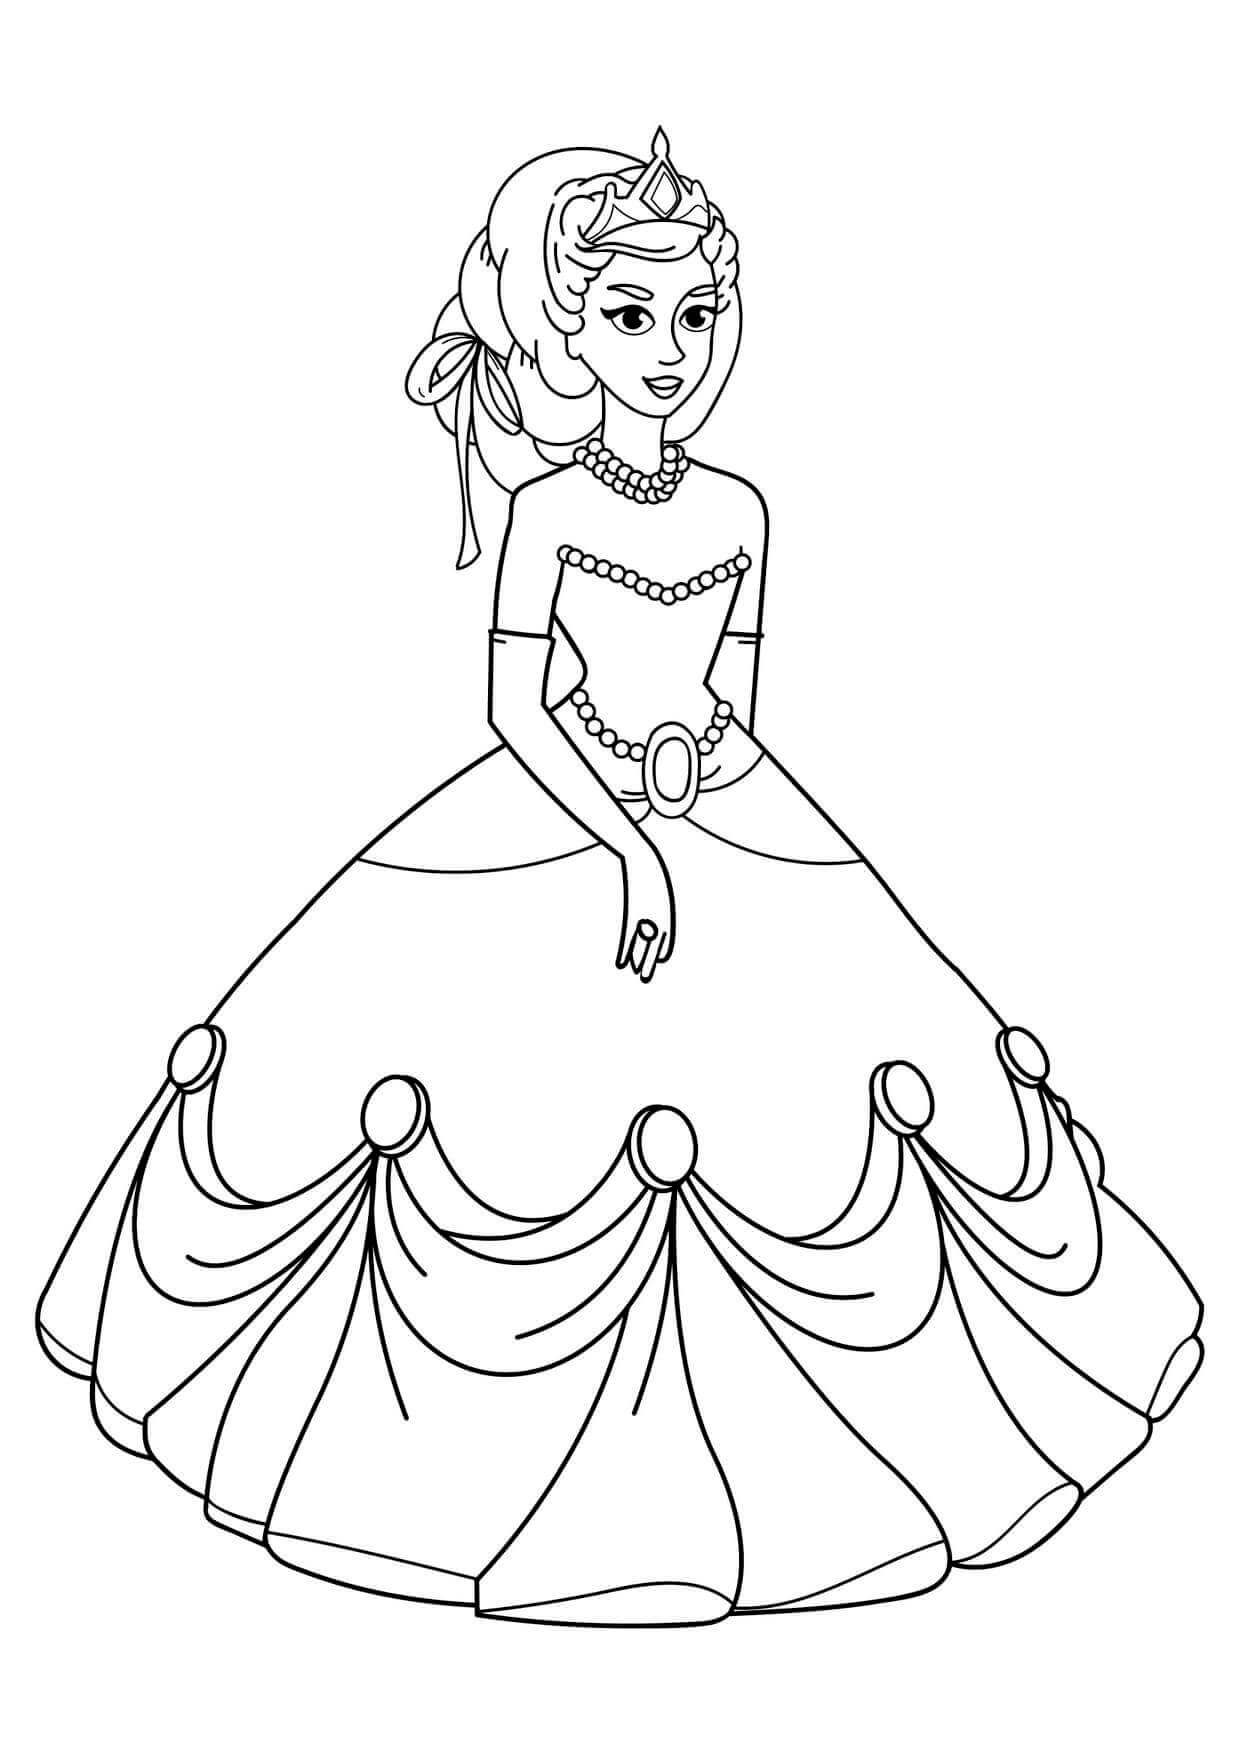 Free Printable Coloring Pages For Girls   Coloring Home